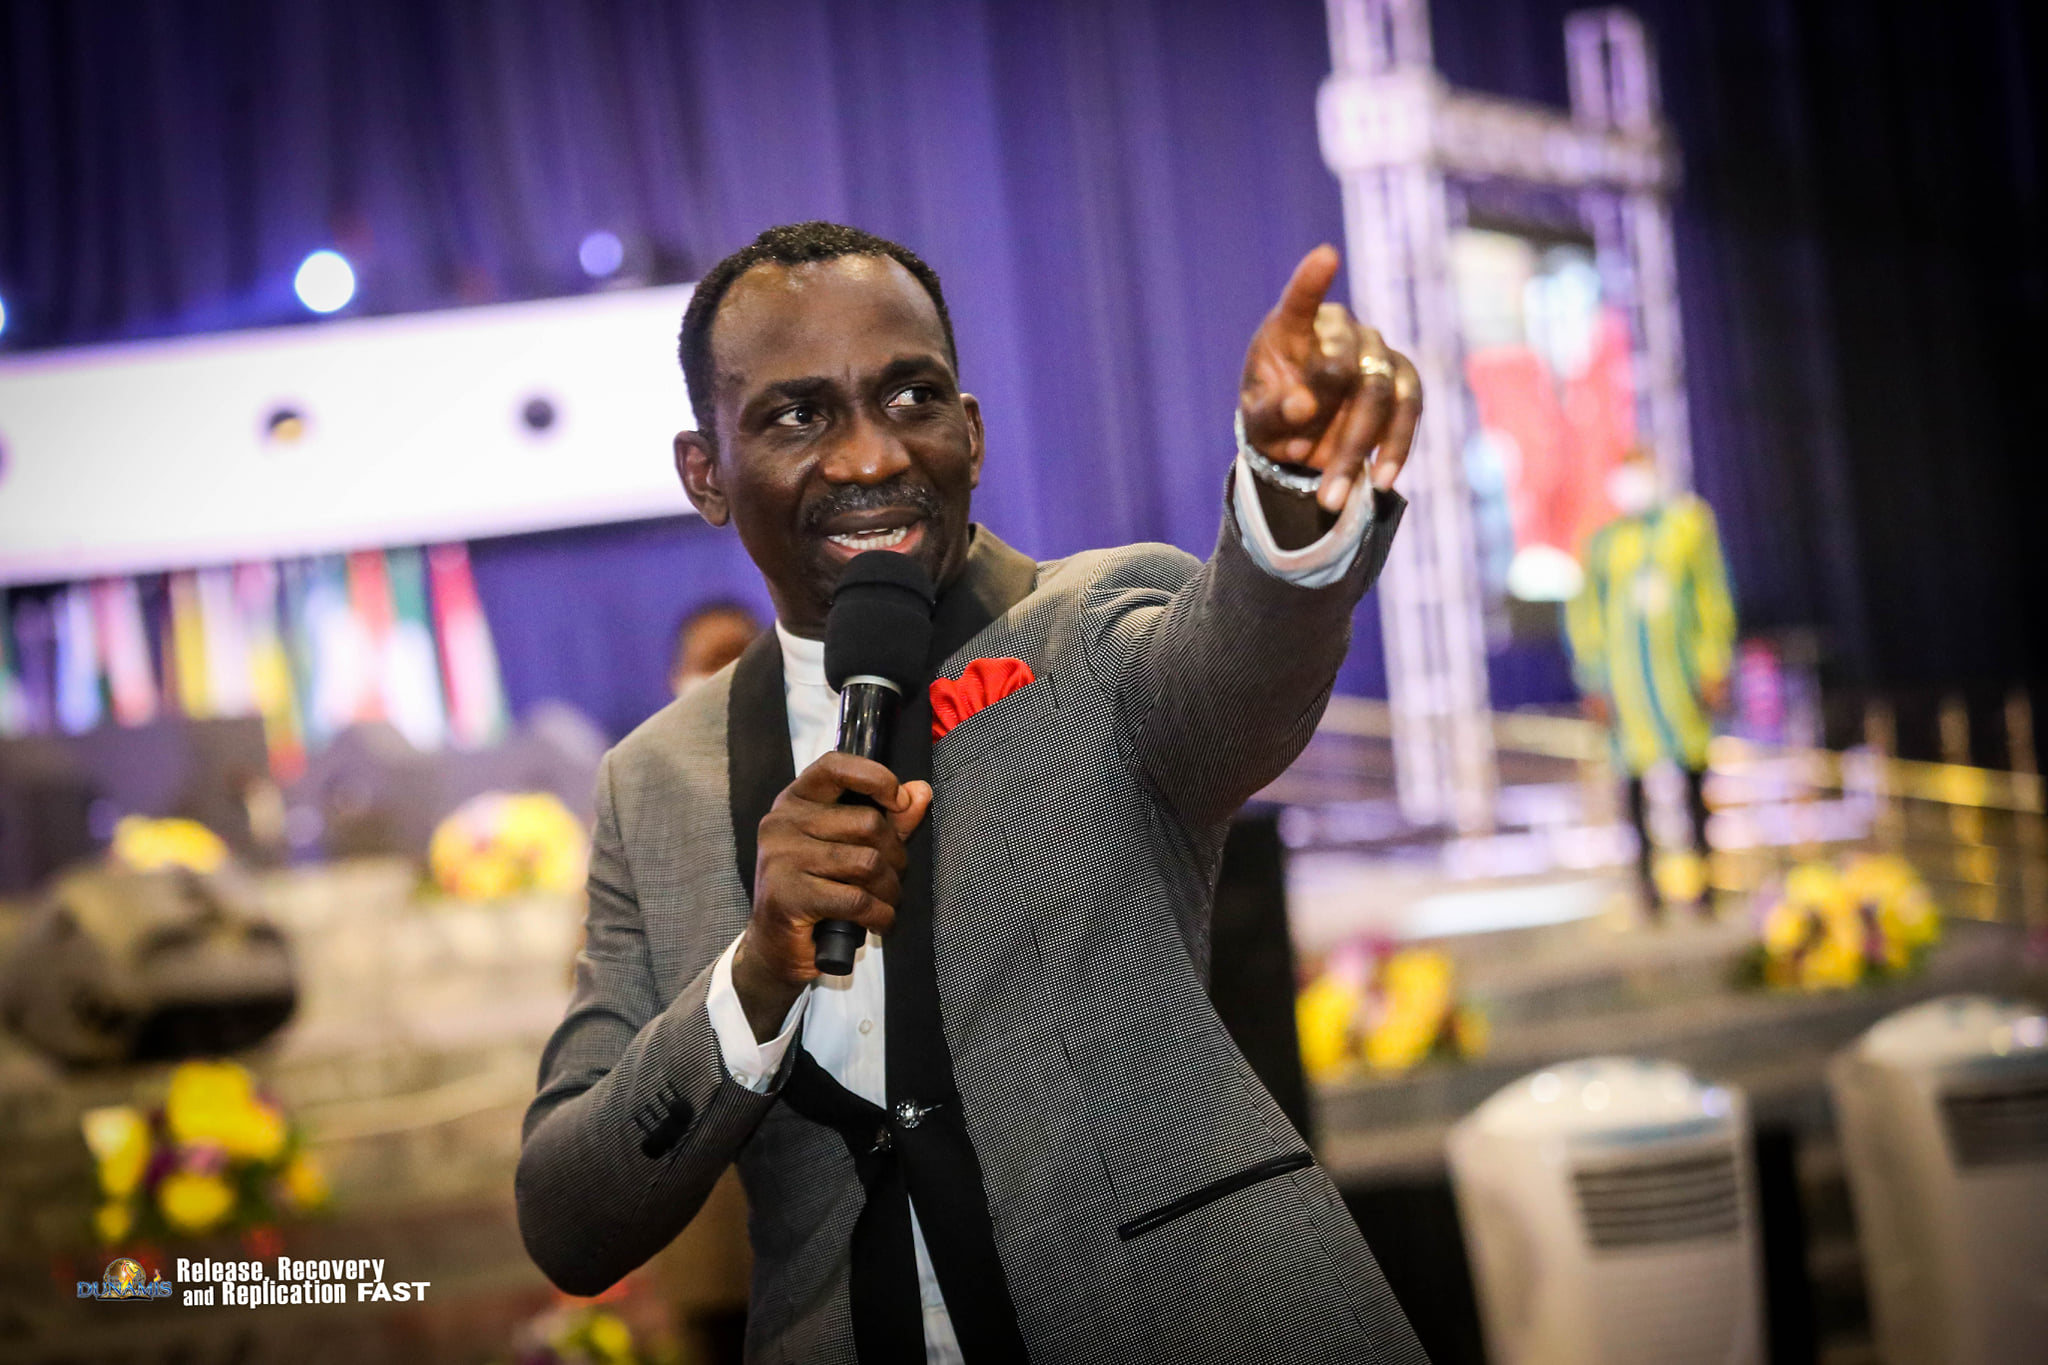 Download SHILOH 2020 - TURNAROUND ENCOUNTERS - HOUR OF VISITATION DAY 2.2 - Pastor Paul Enenche.mp3